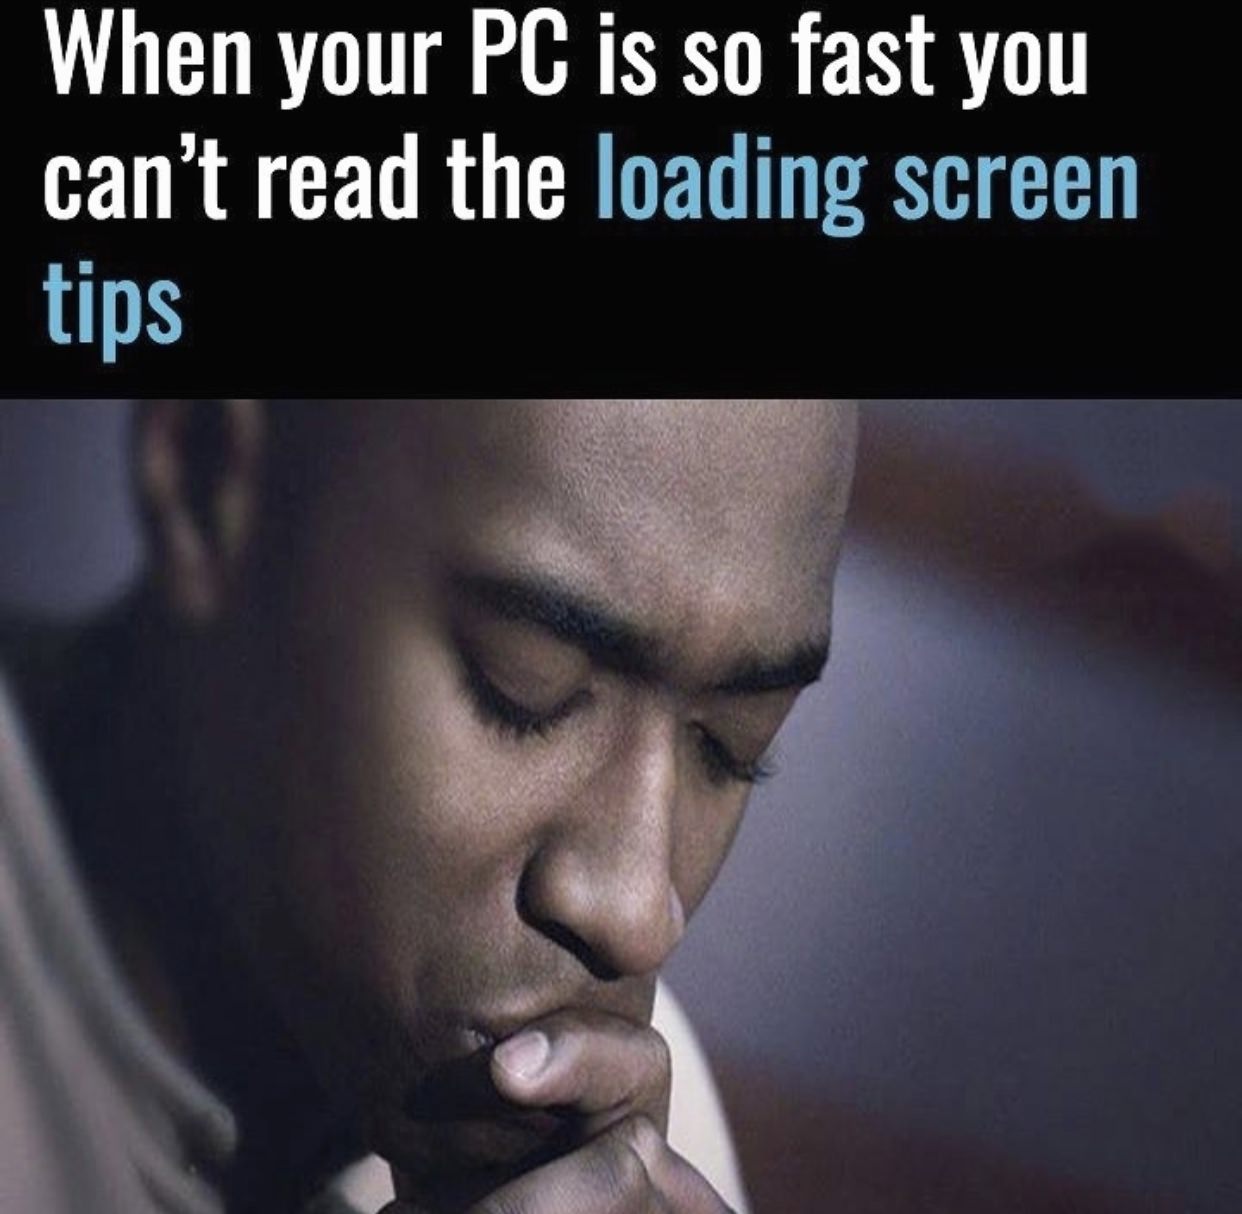 photo caption - When your Pc is so fast you can't read the loading screen tips